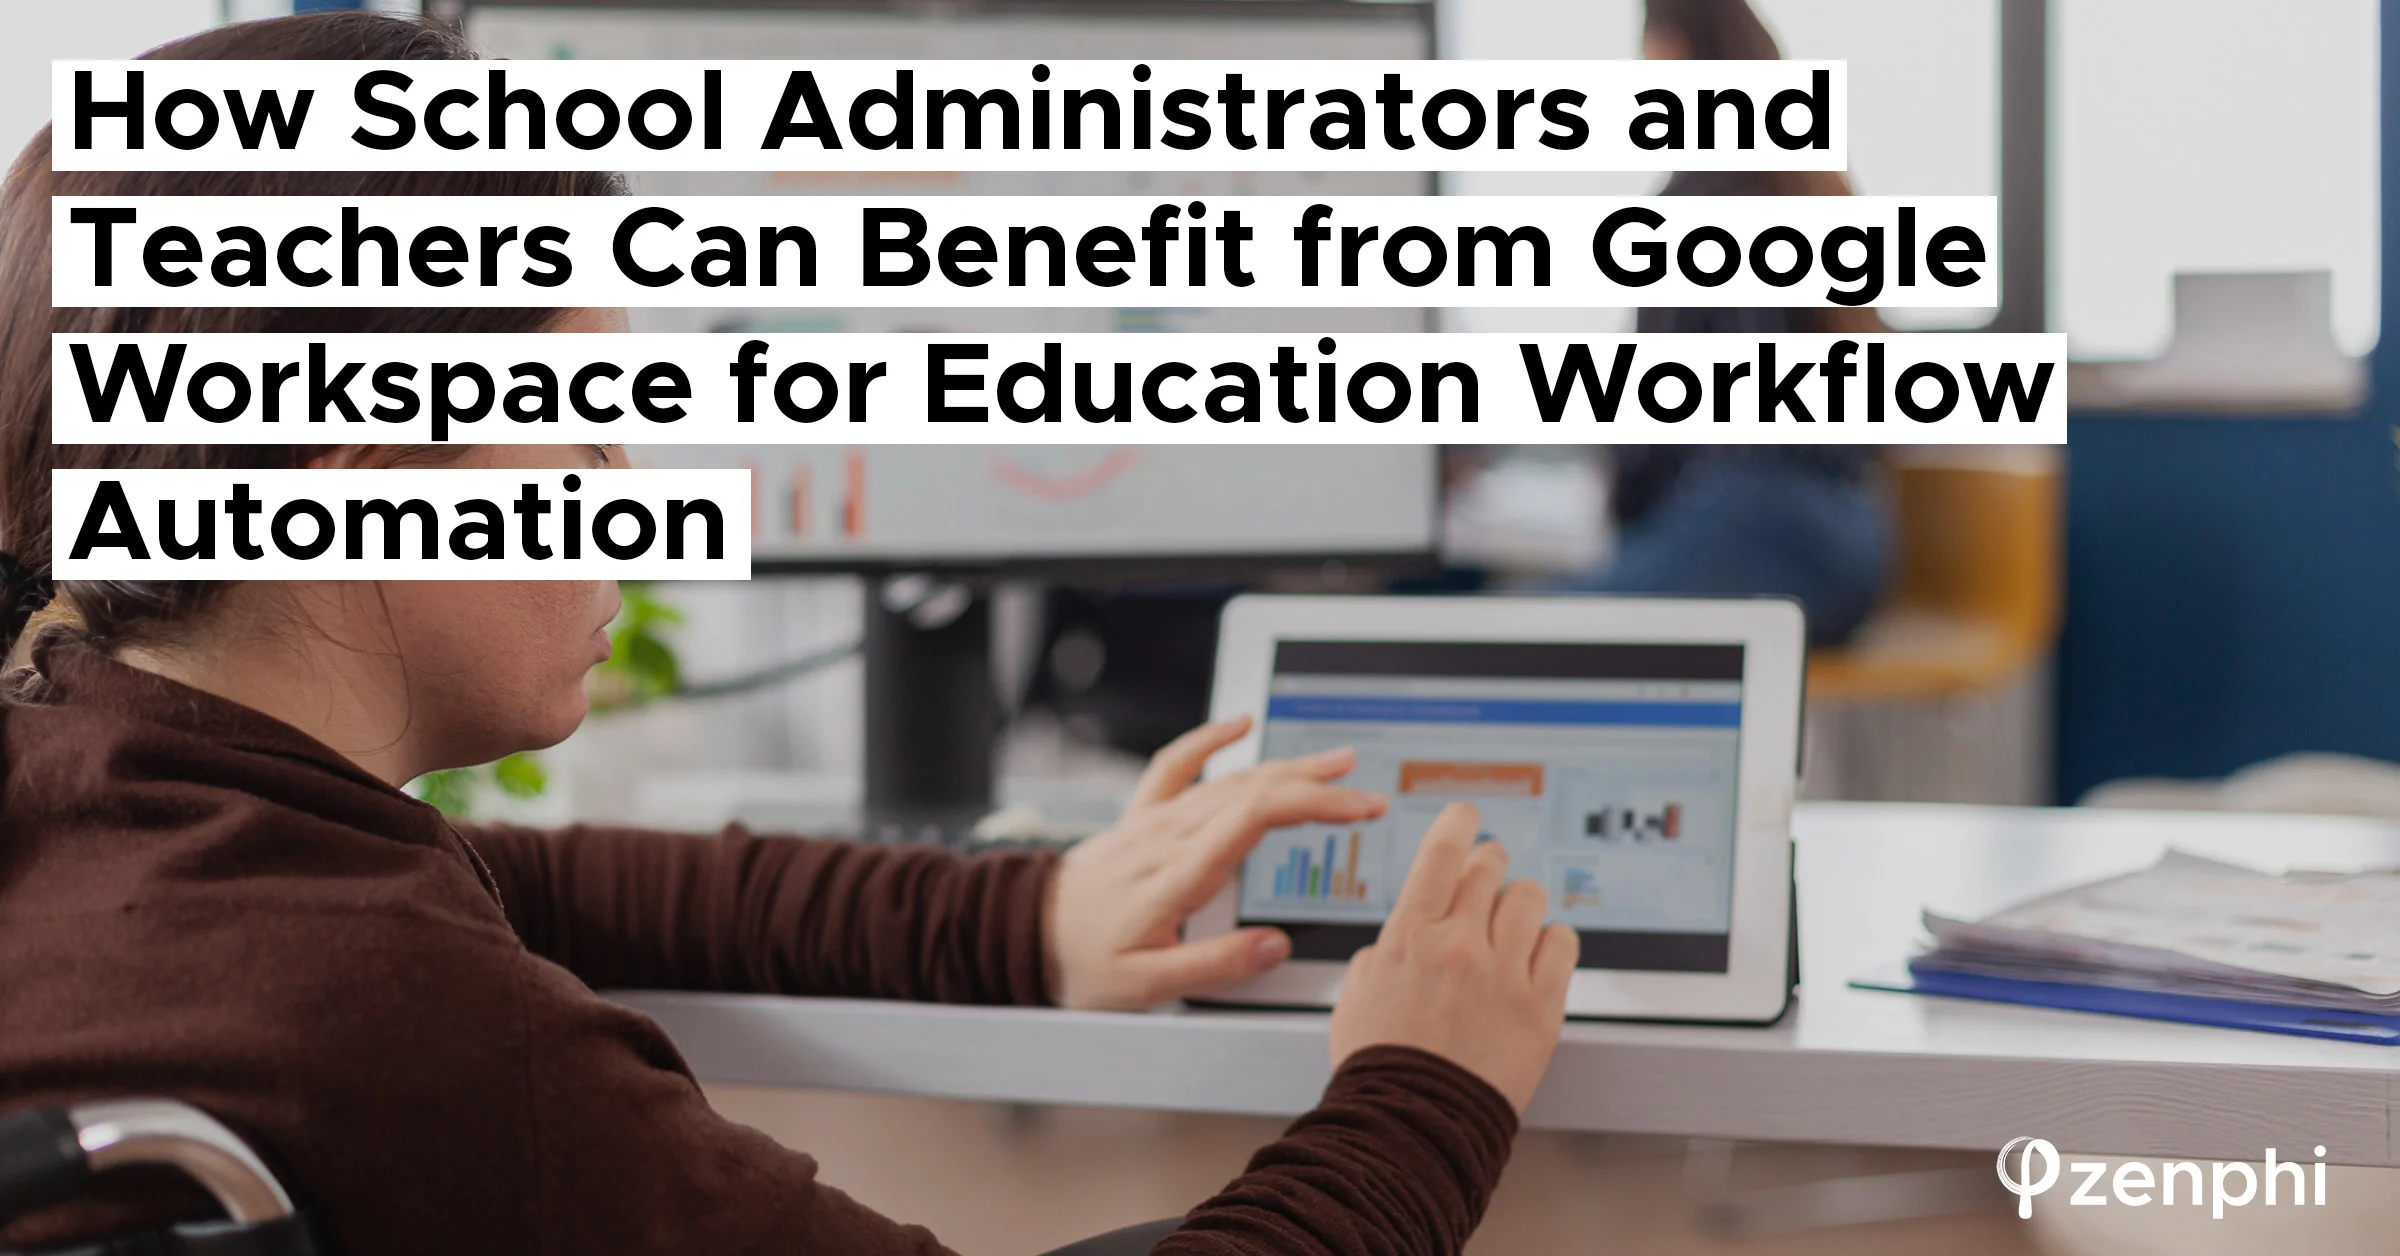 Google Workspace for Education Workflow Automation